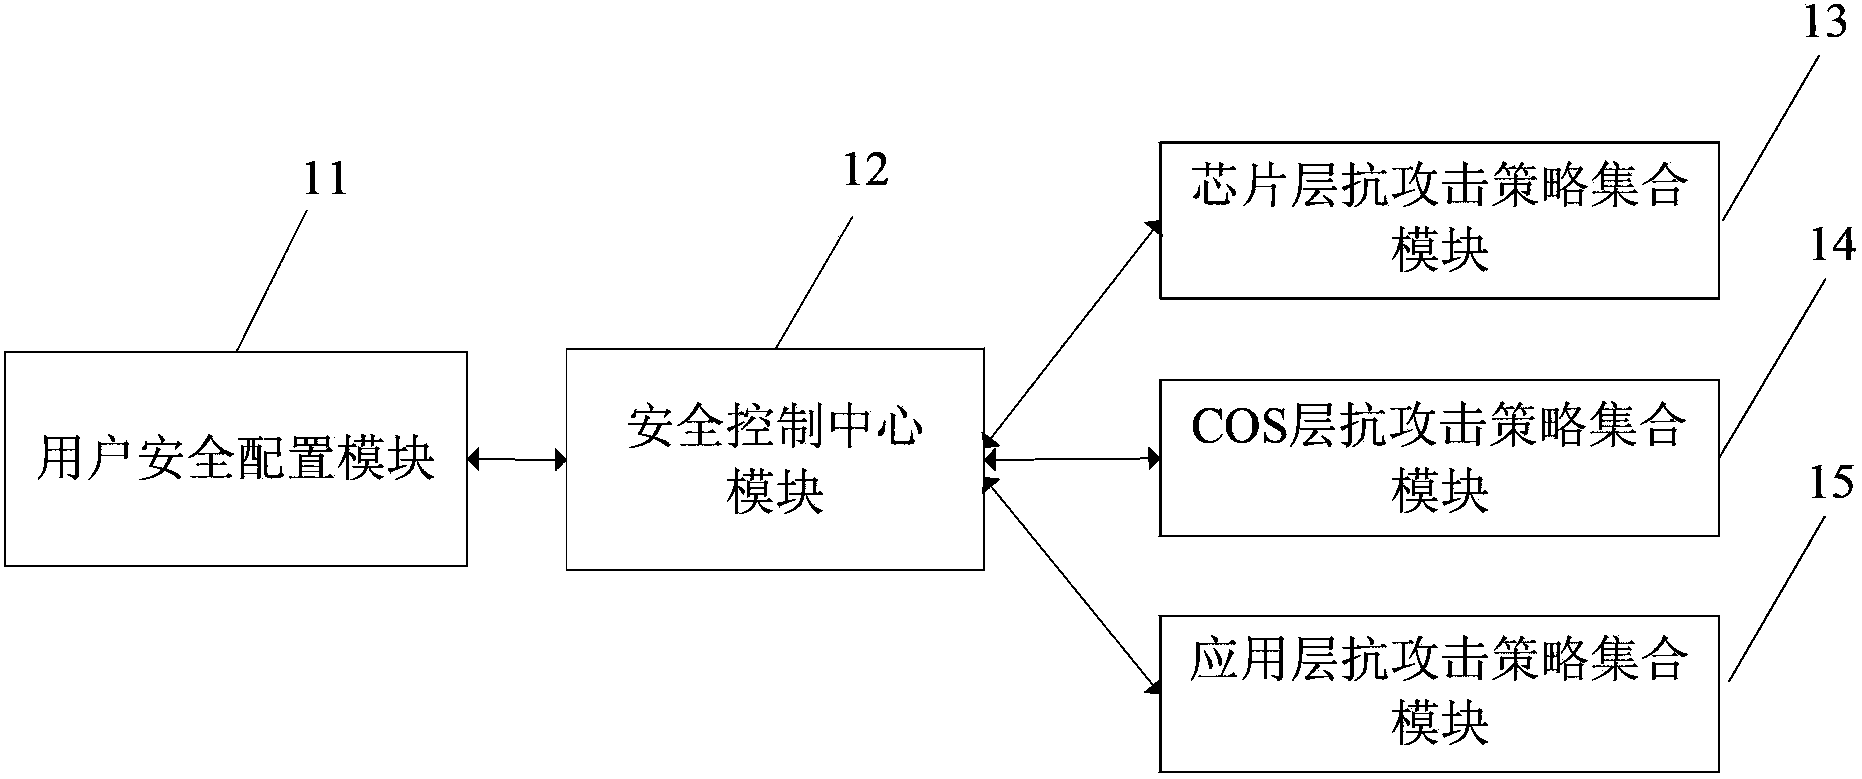 Method and system for three-in-one smart card anti-side-channel-attack protection